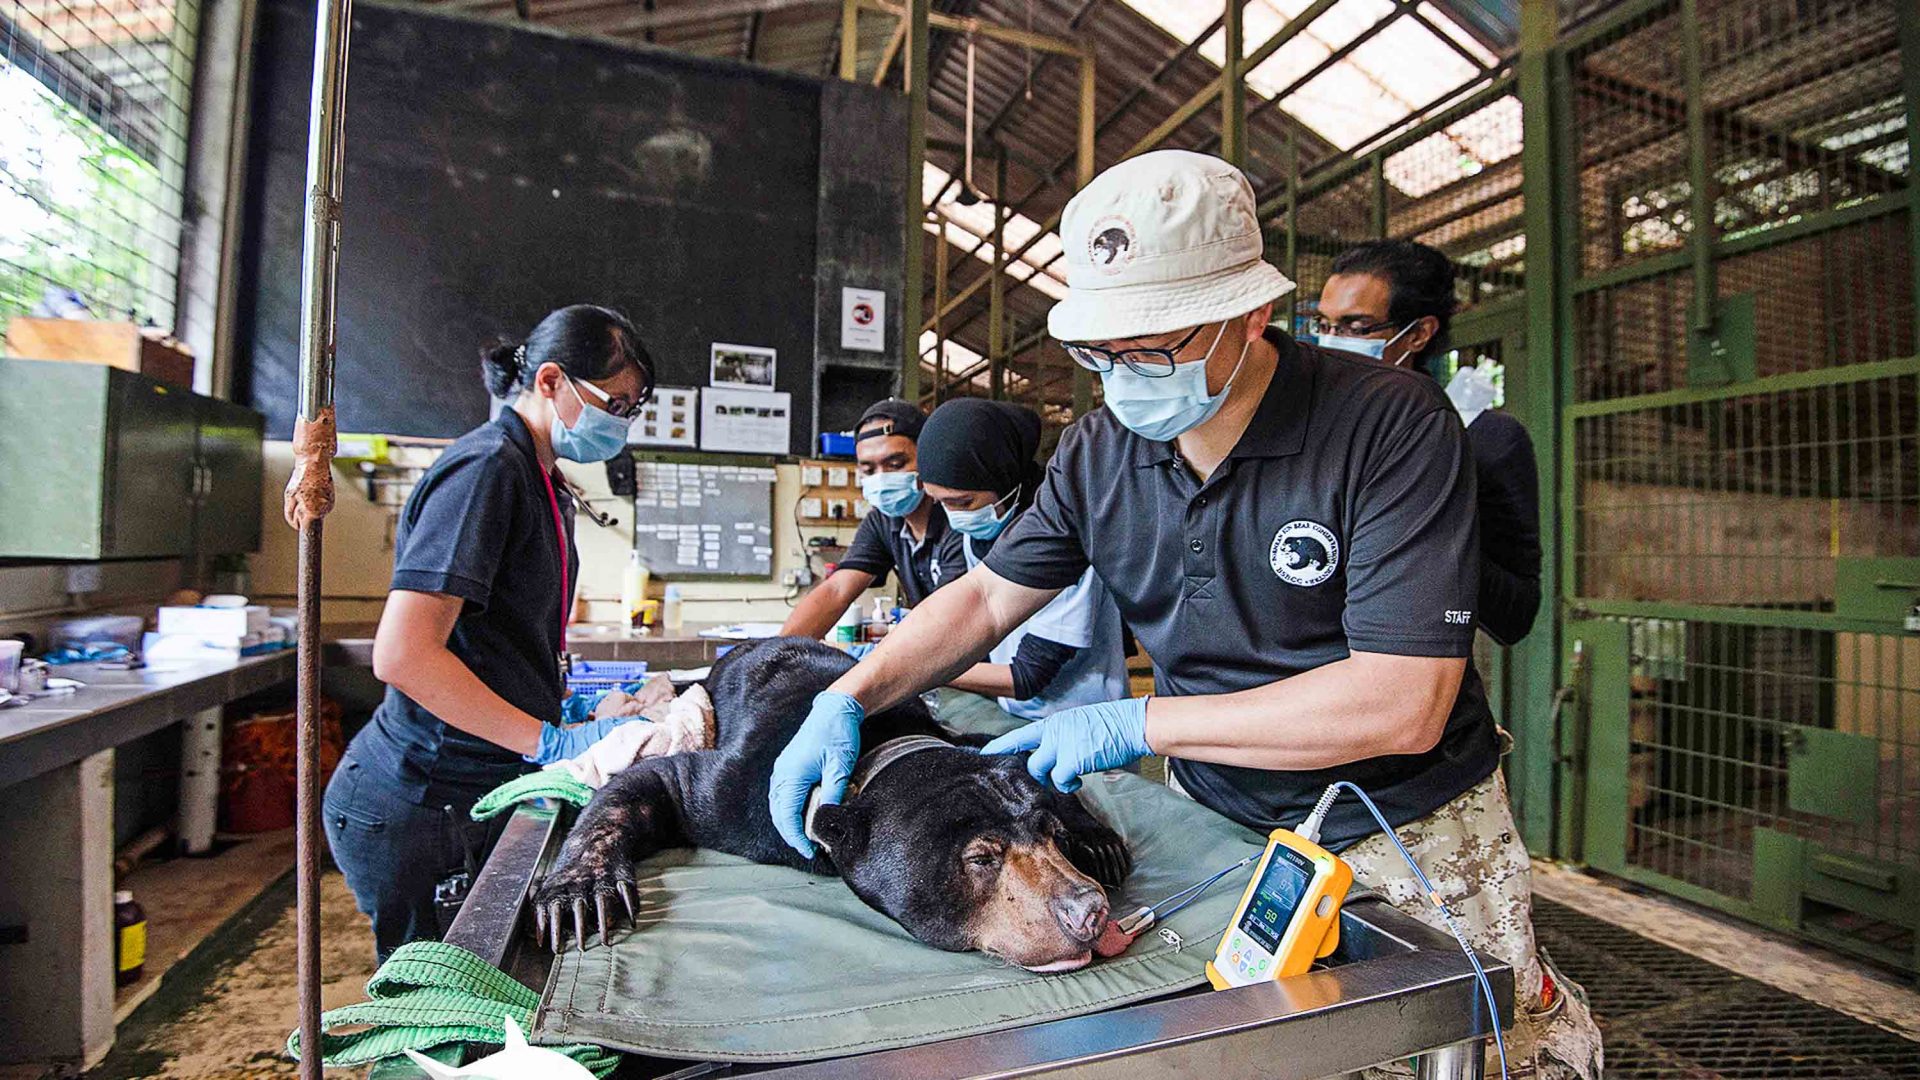 Dr Wong and his team check the health of a sedated bear.